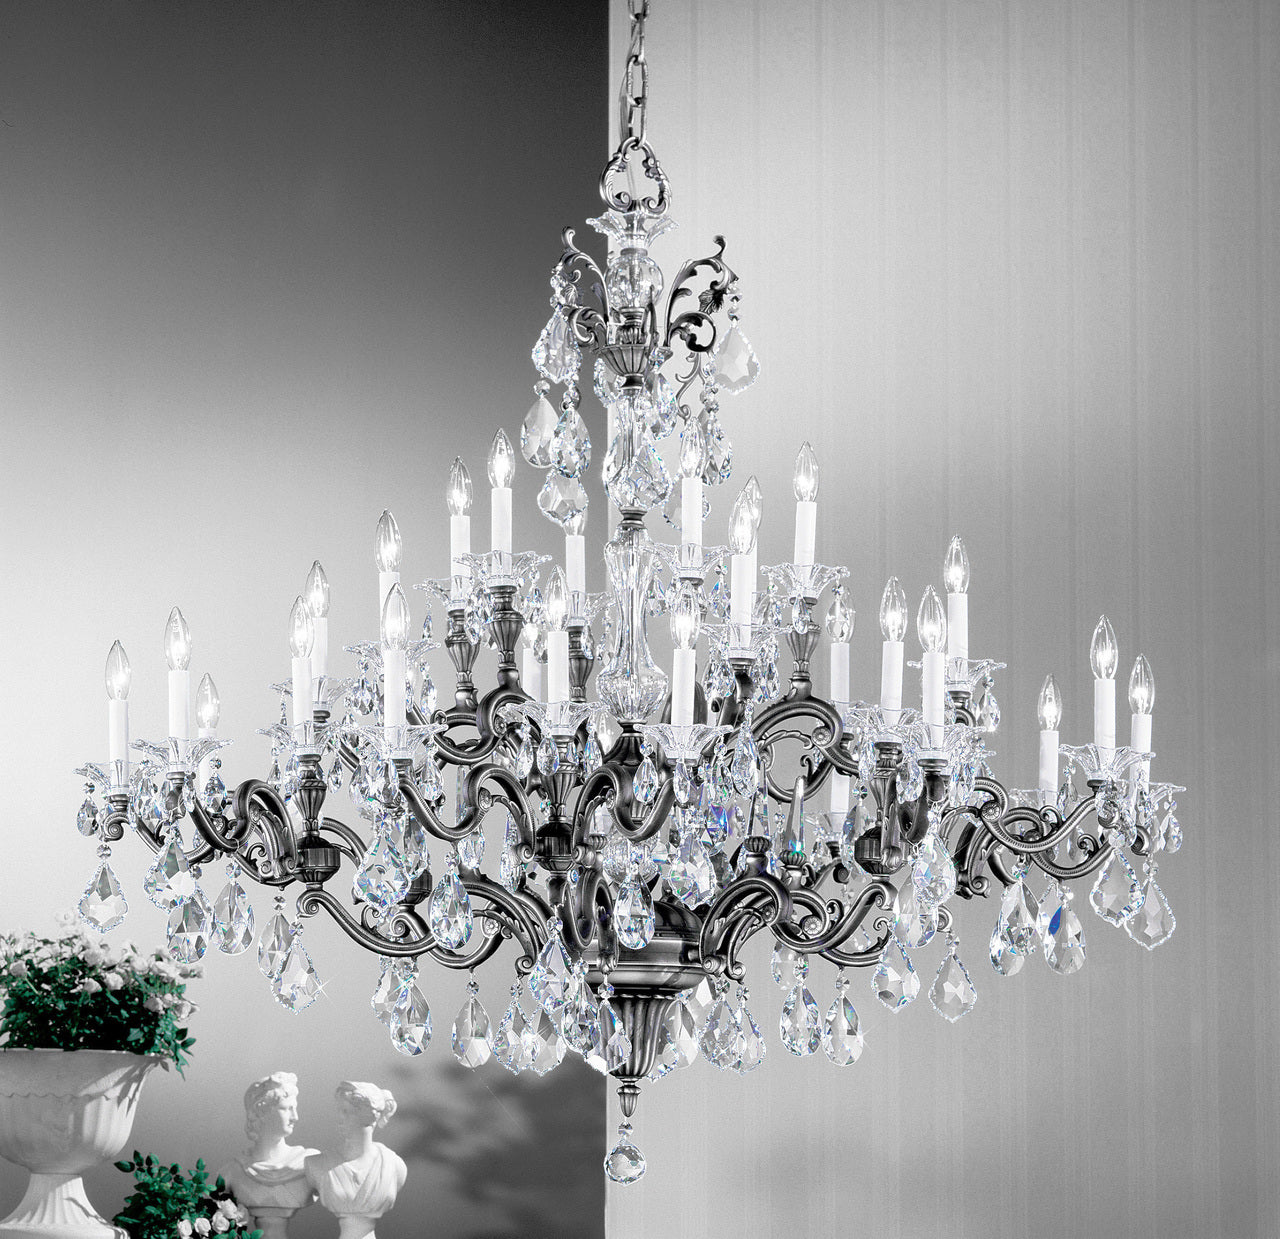 Classic Lighting 57130 MS IRA Via Firenze Crystal Chandelier in Millennium Silver (Imported from Spain)